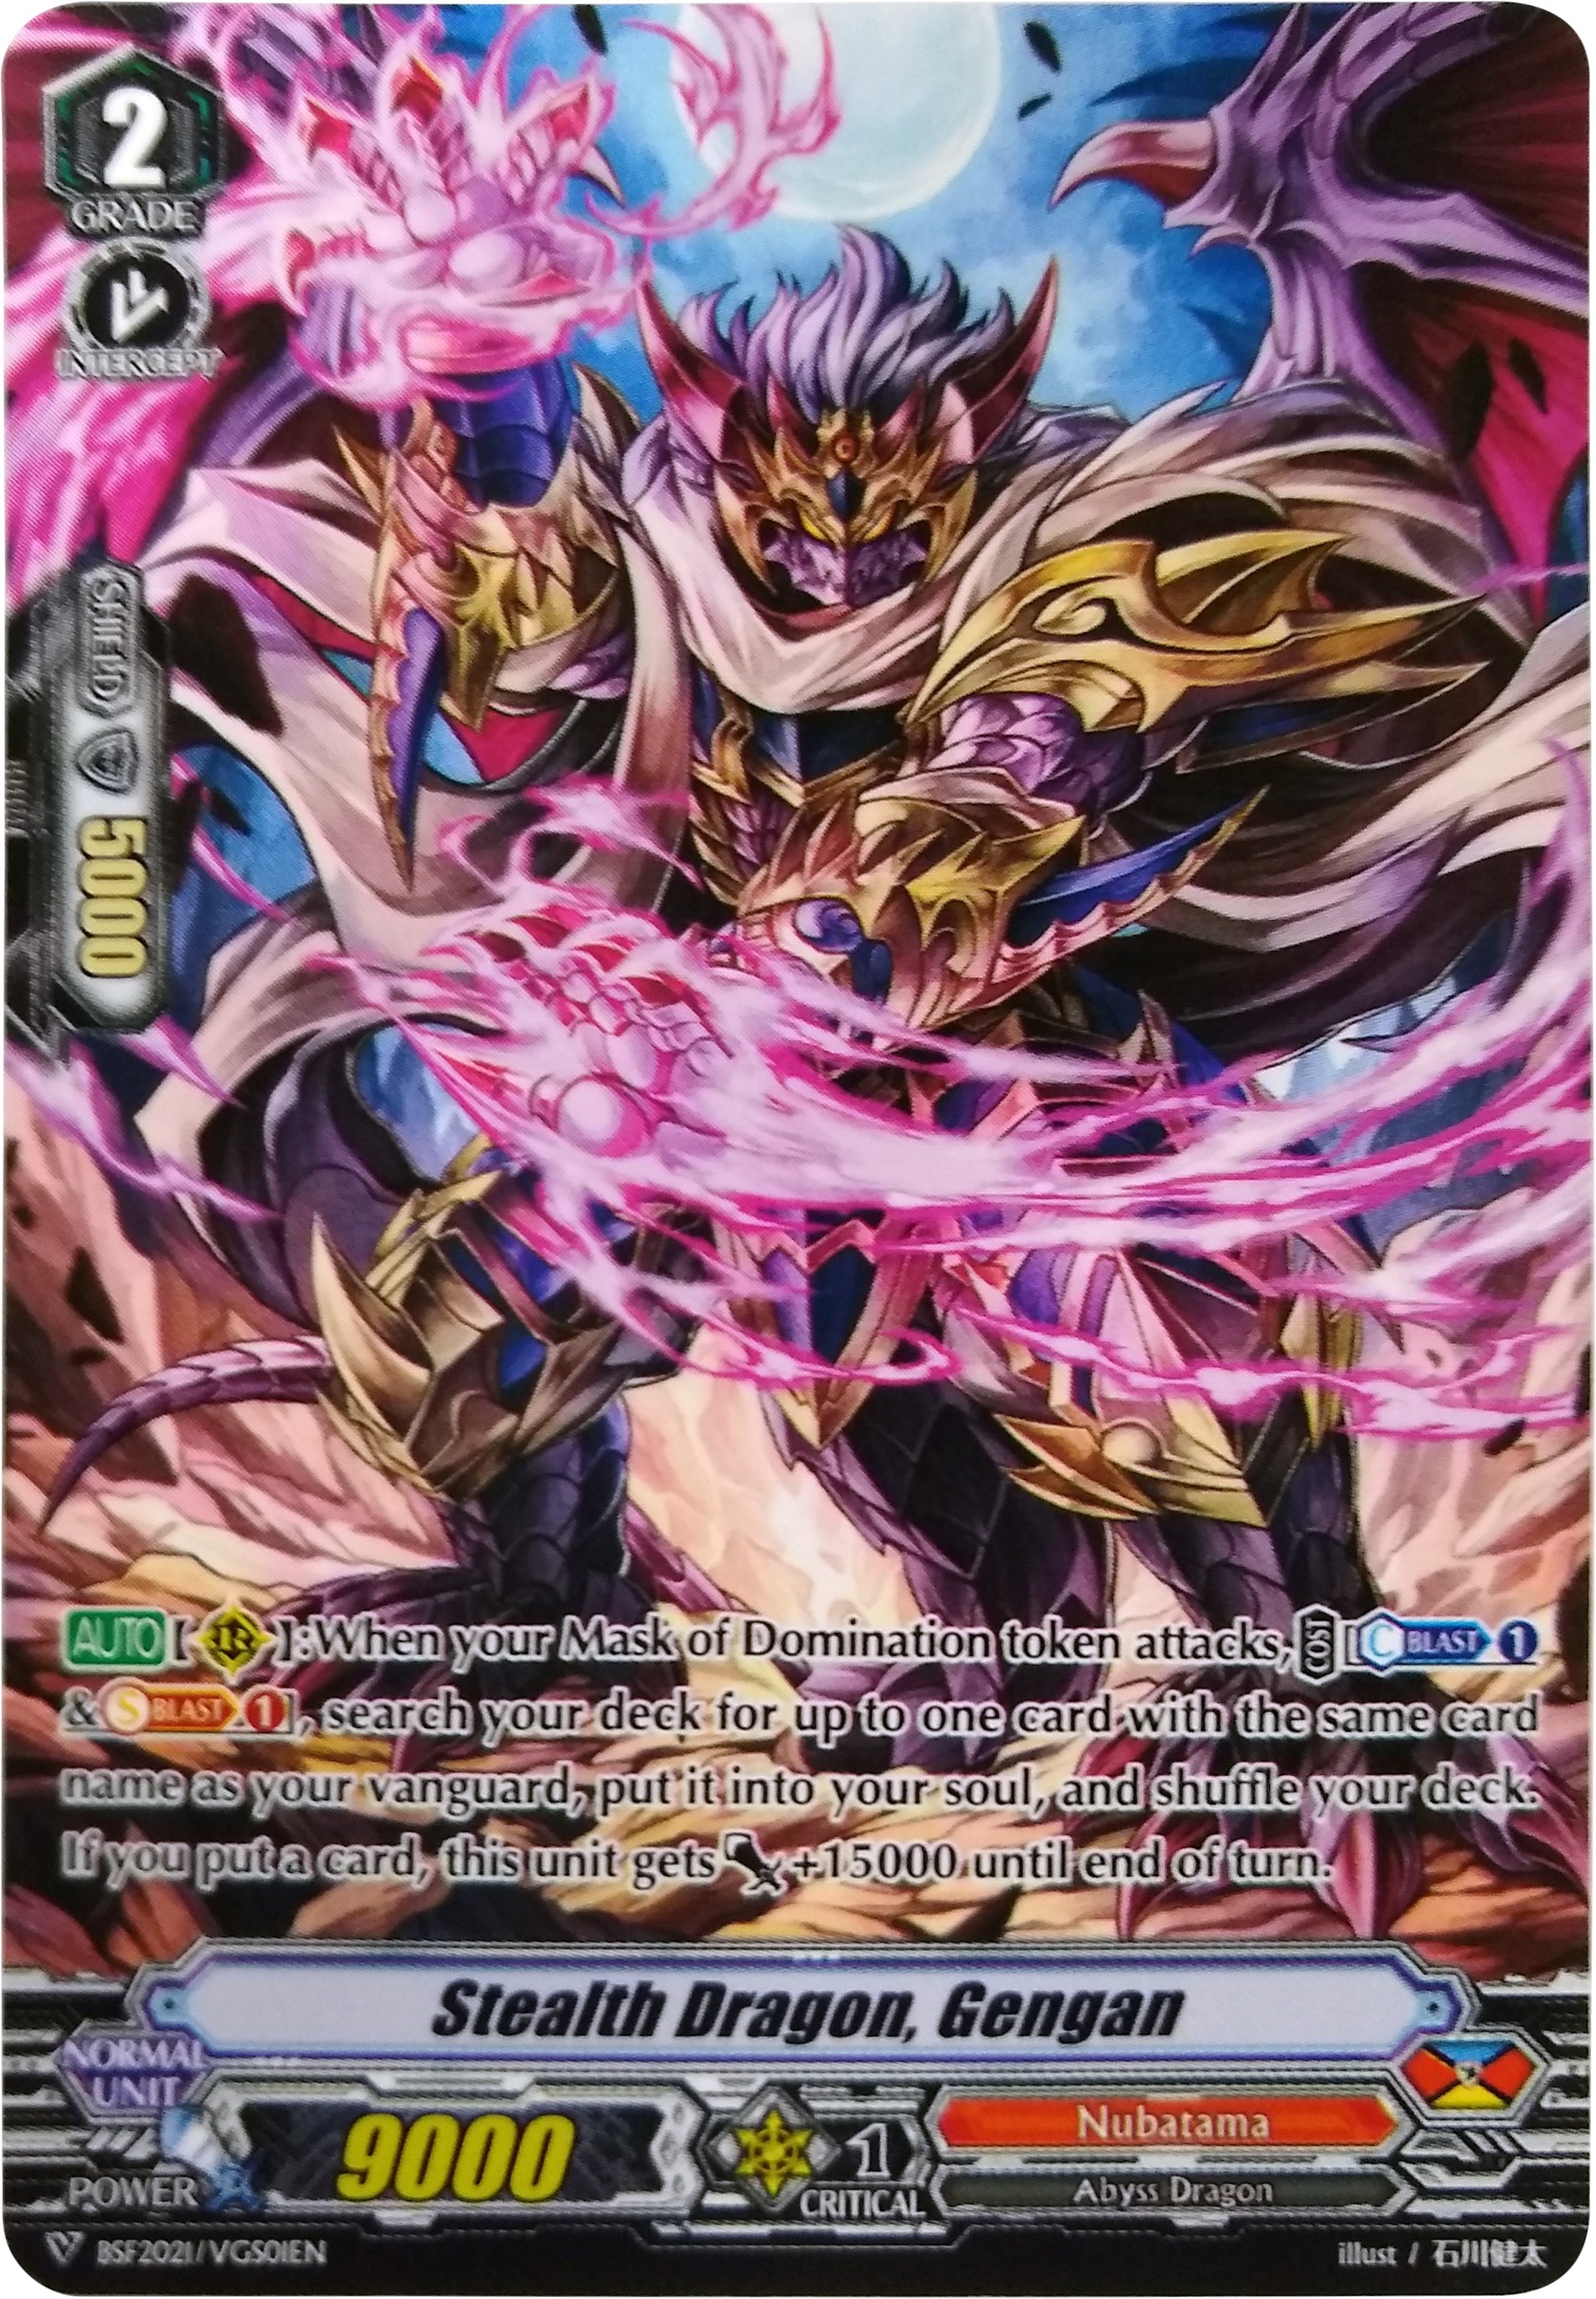 Stealth Dragon, Gengan (BSF2021/VGS01EN) [Bushiroad Event Cards] | Total Play